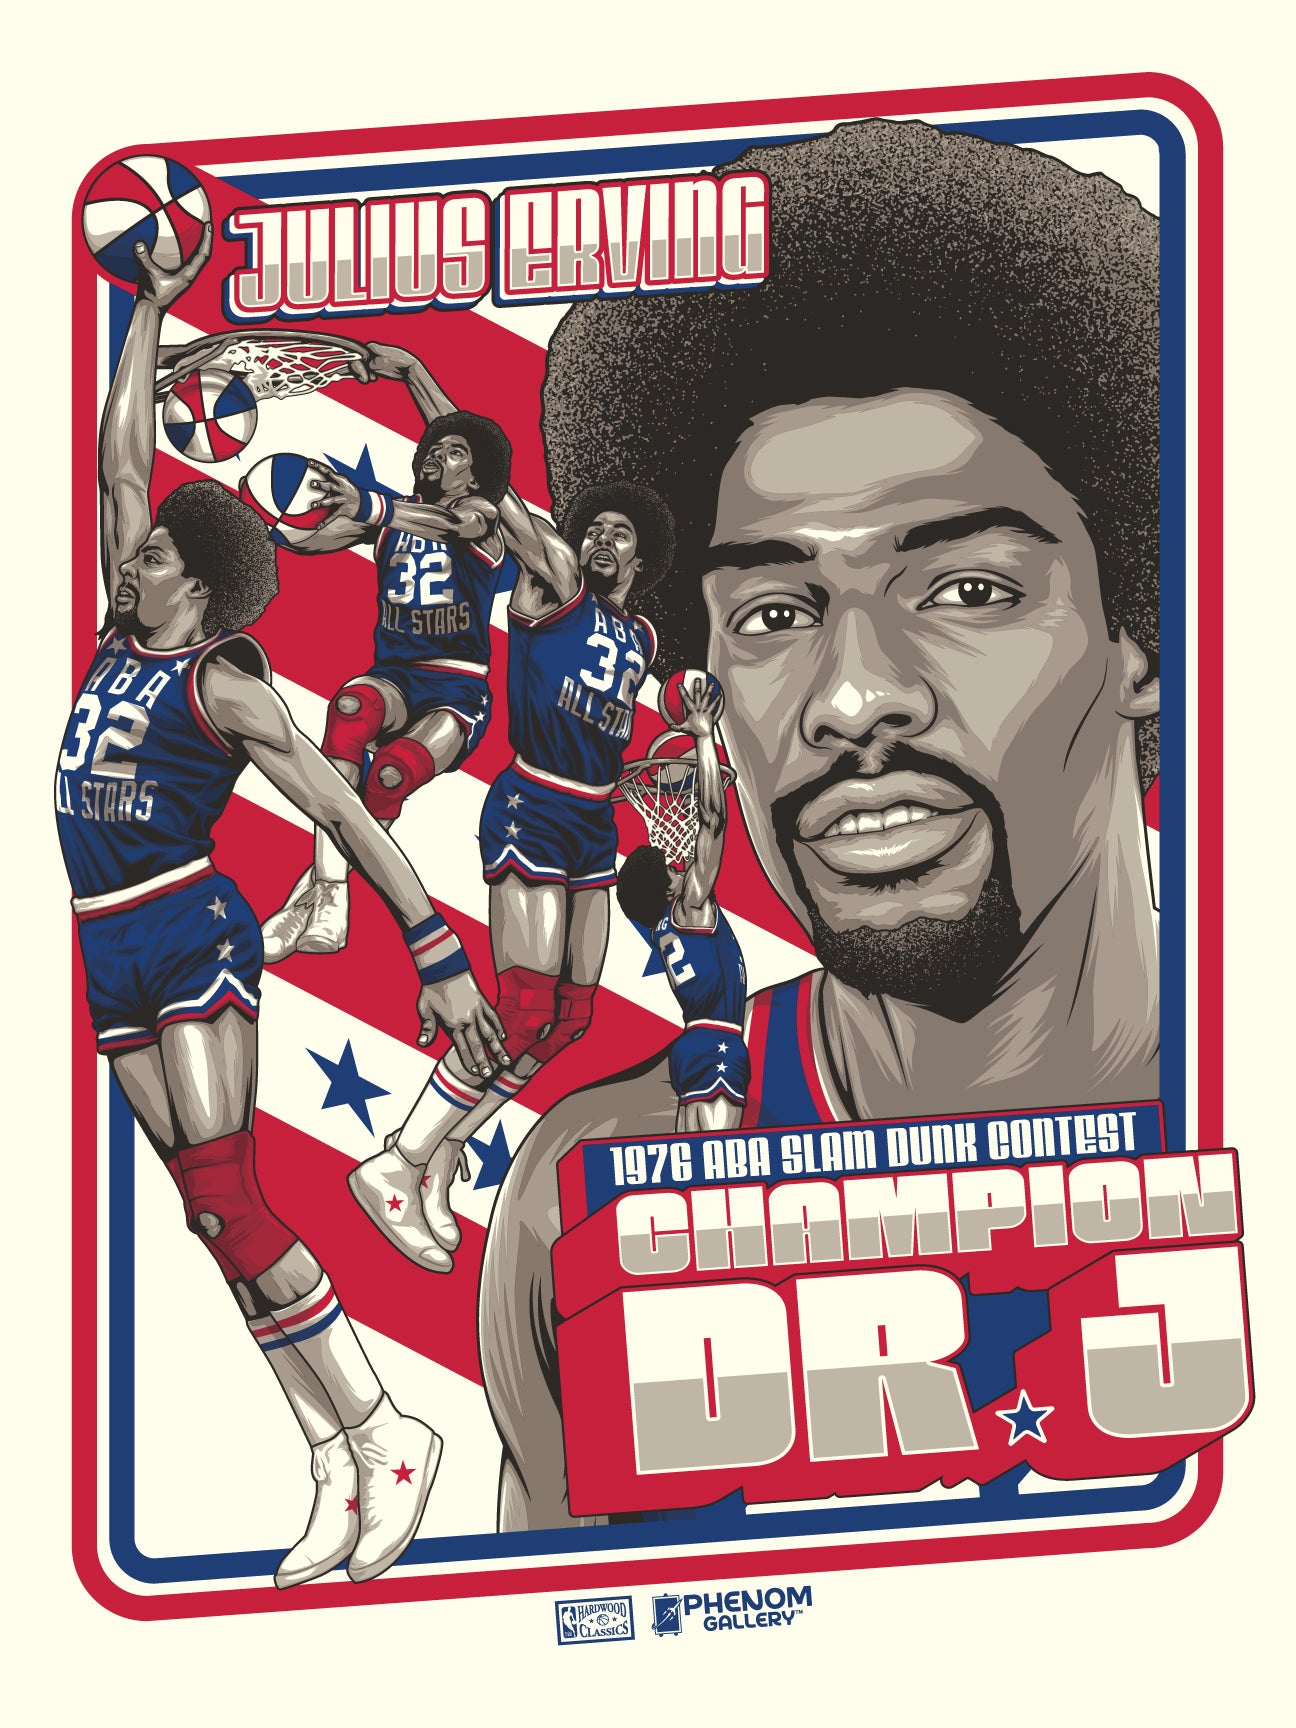 Julius Erving Signed Poster. The amazing Dr. J has graced this